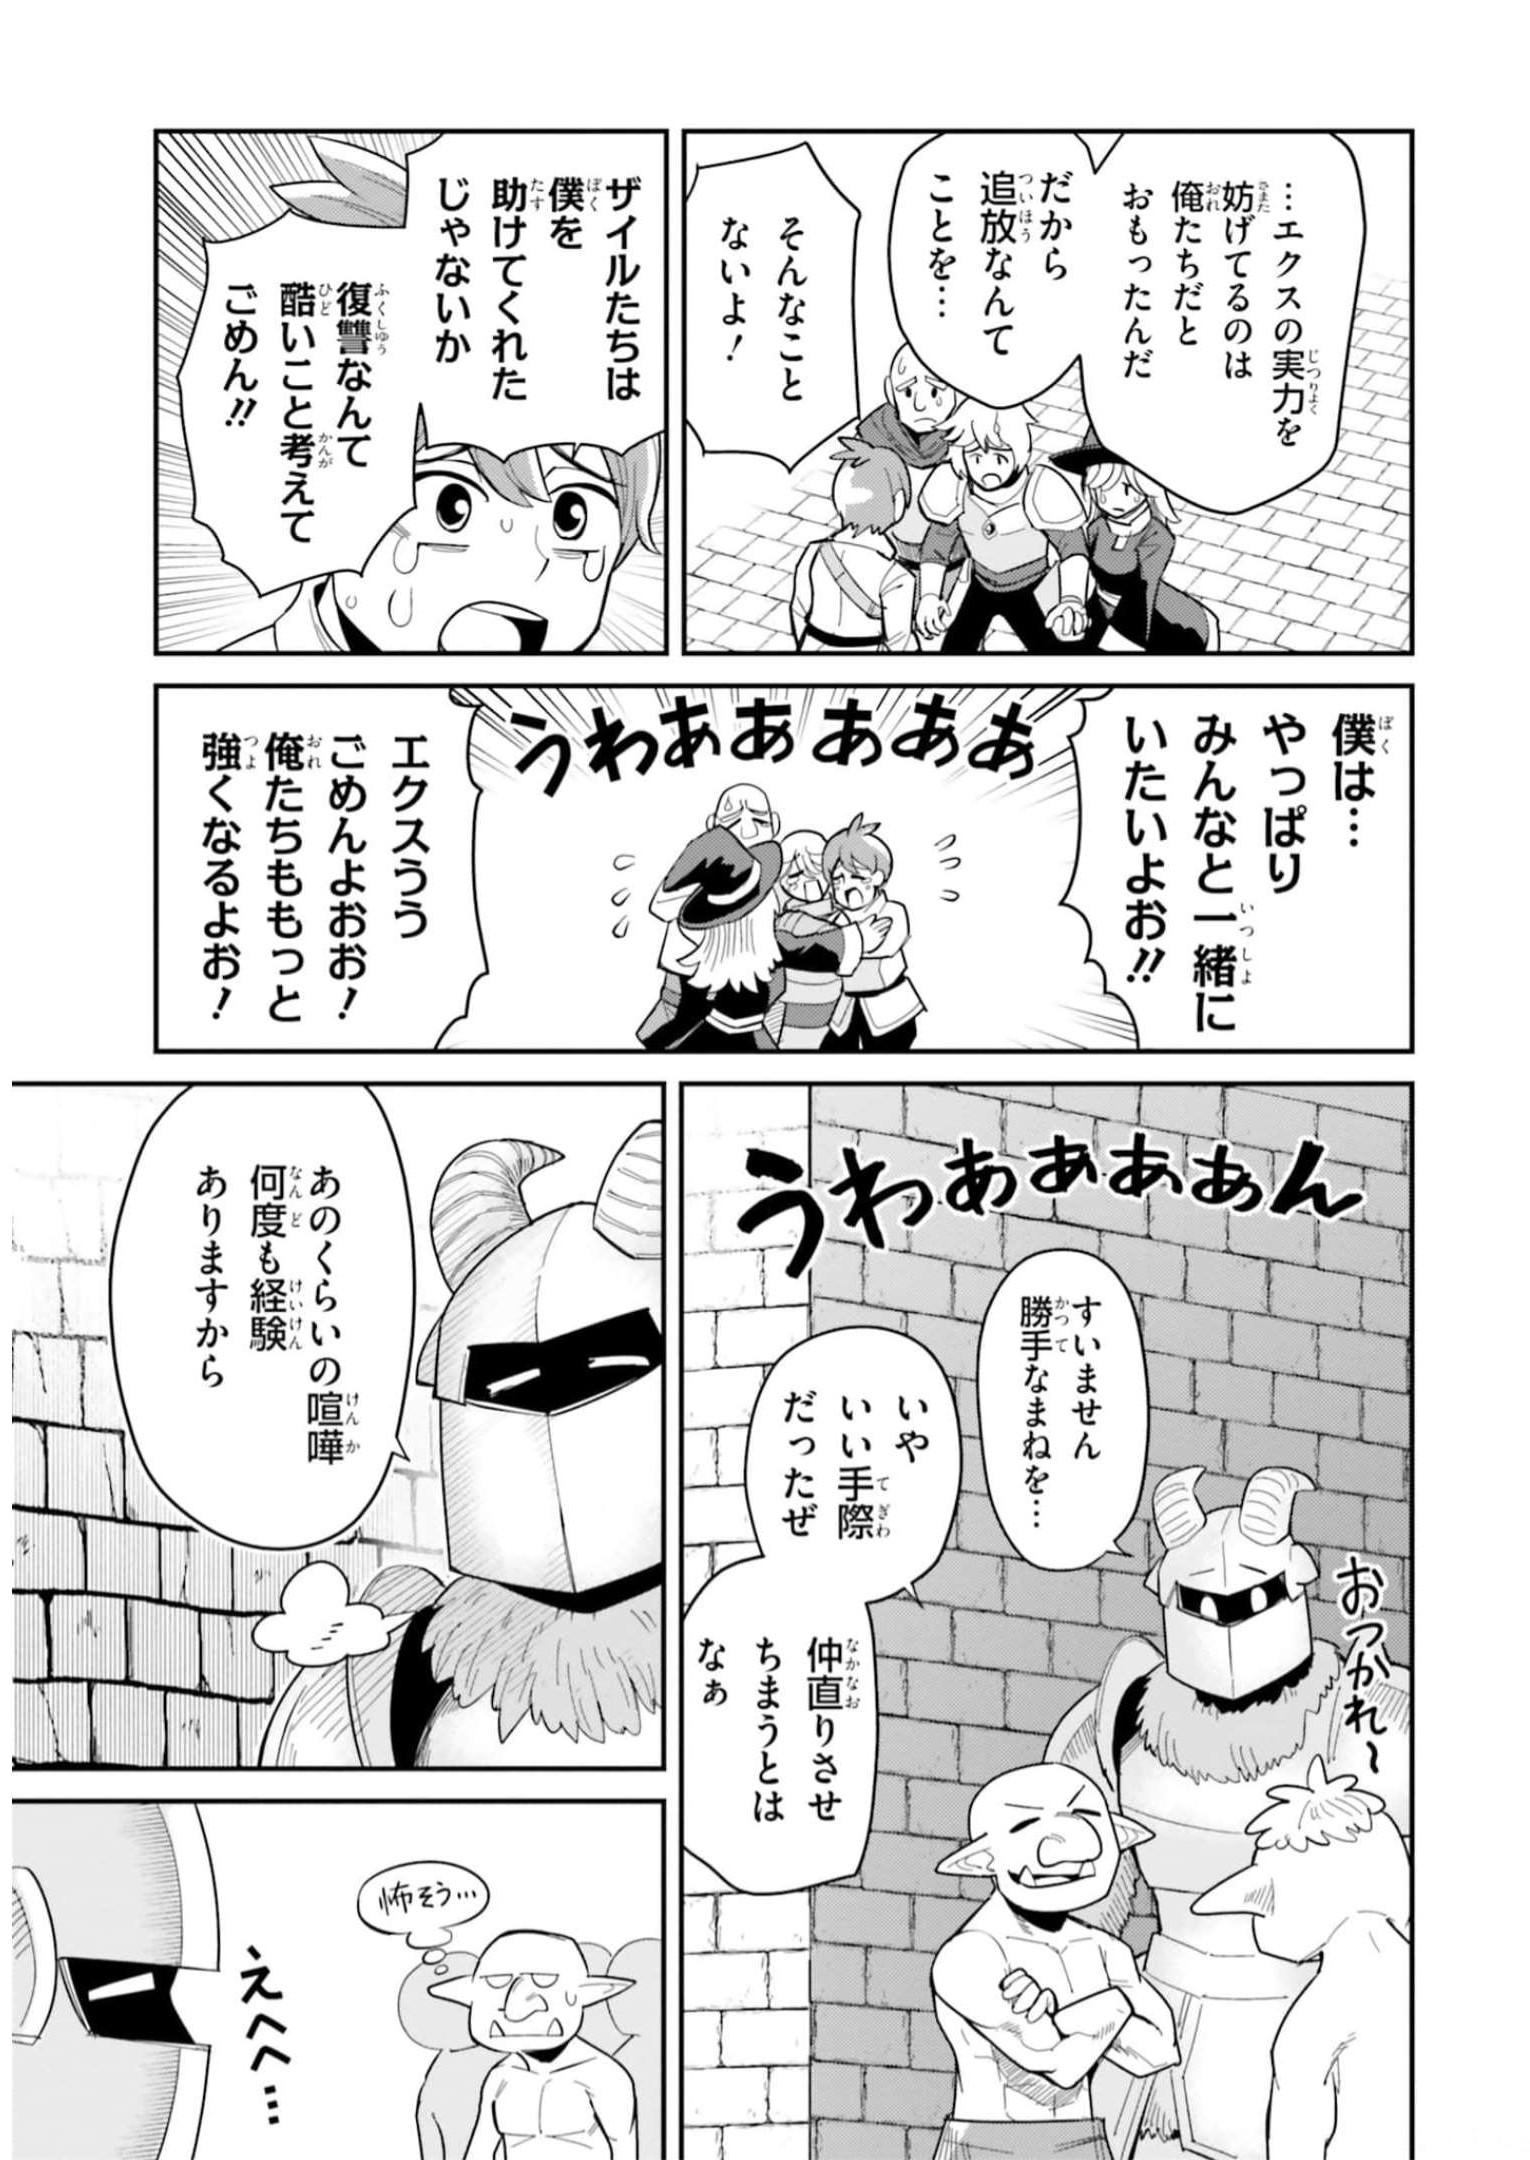 Dungeon Friends Forever Dungeon's Childhood Friend ダンジョンの幼なじみ 第25話 - Page 17